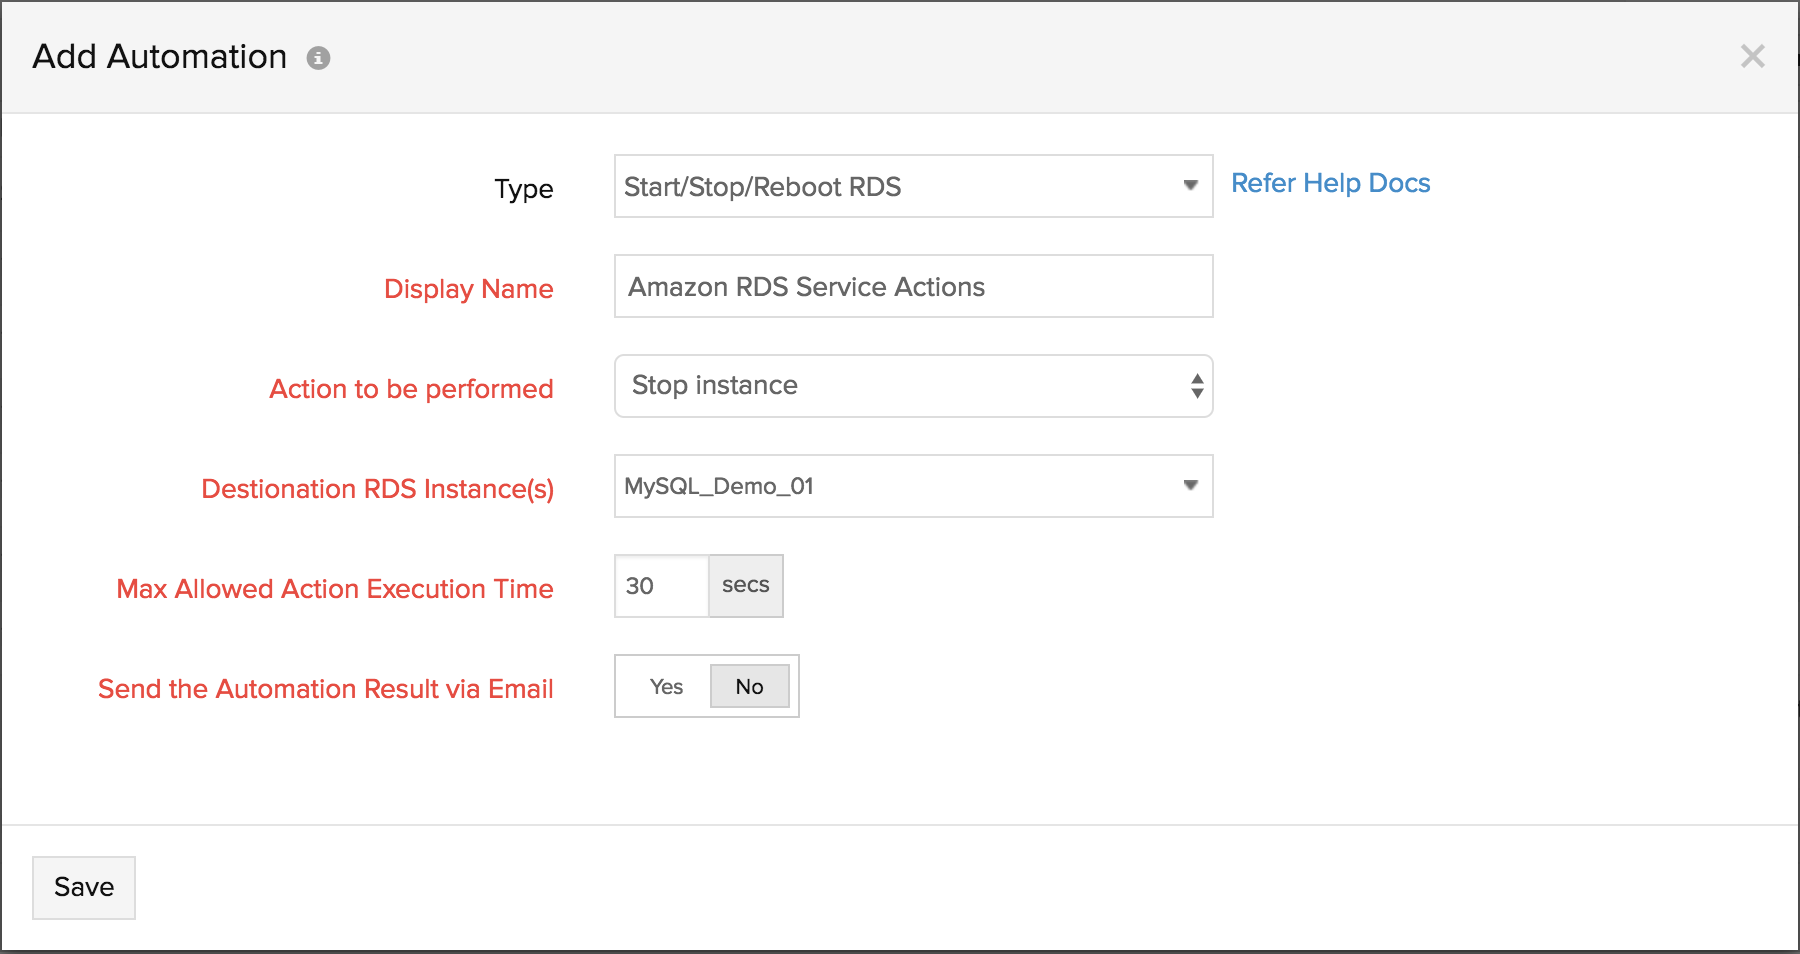 Creating an action profile to automate RDS actions